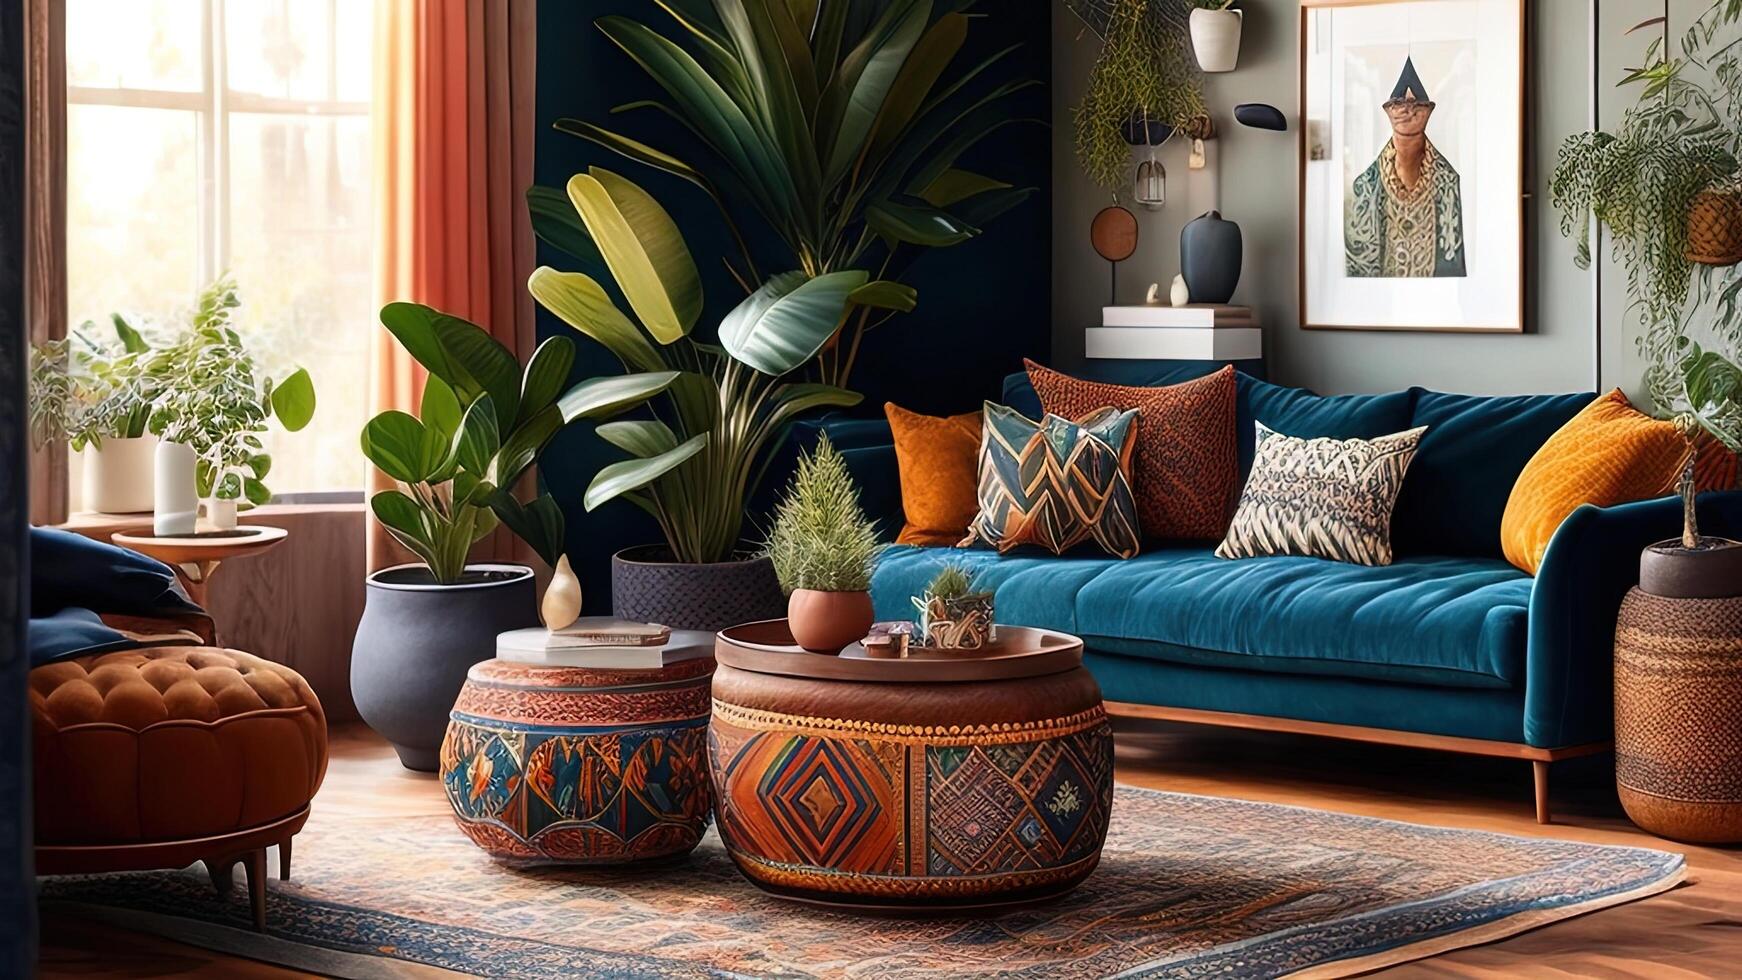 Interior of modern living room with blue sofa, plants and decoration. photo